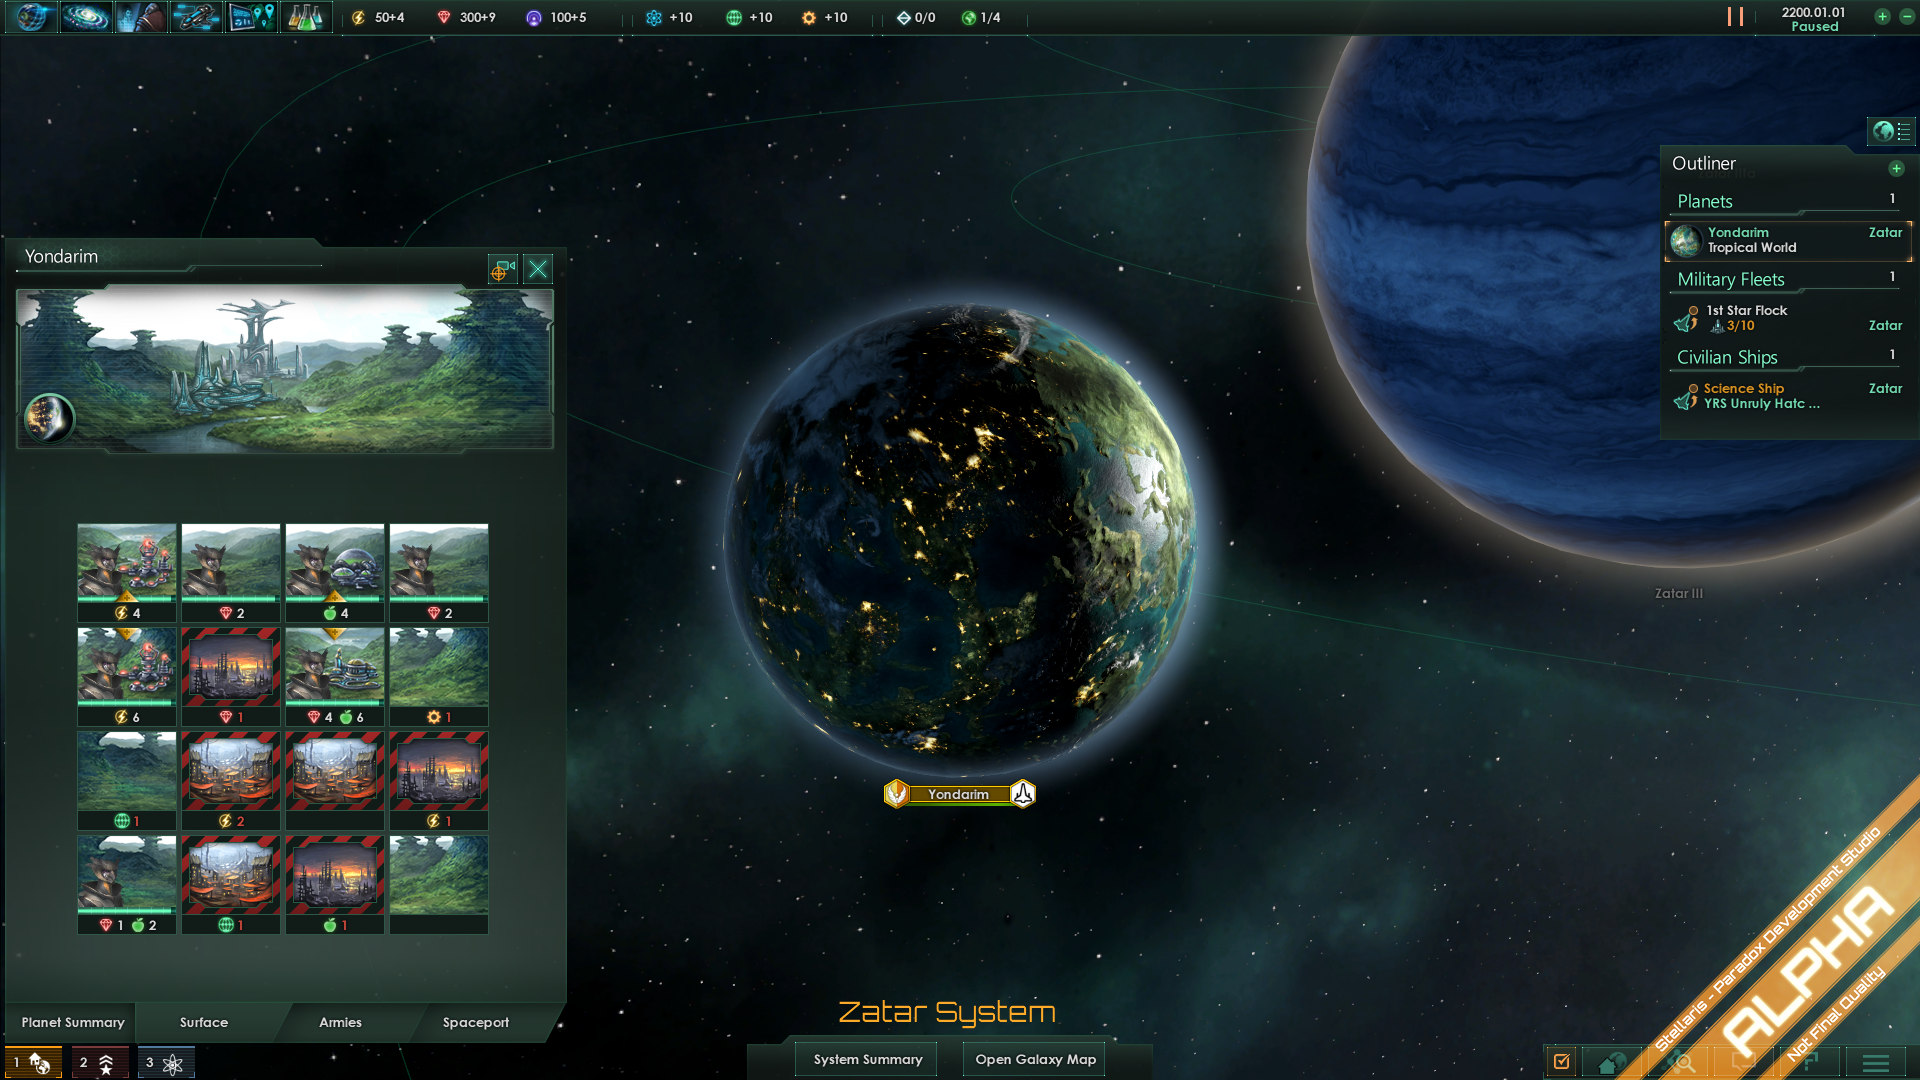 With Stellaris, Paradox is making a better Star Trek game than any official Star Trek game